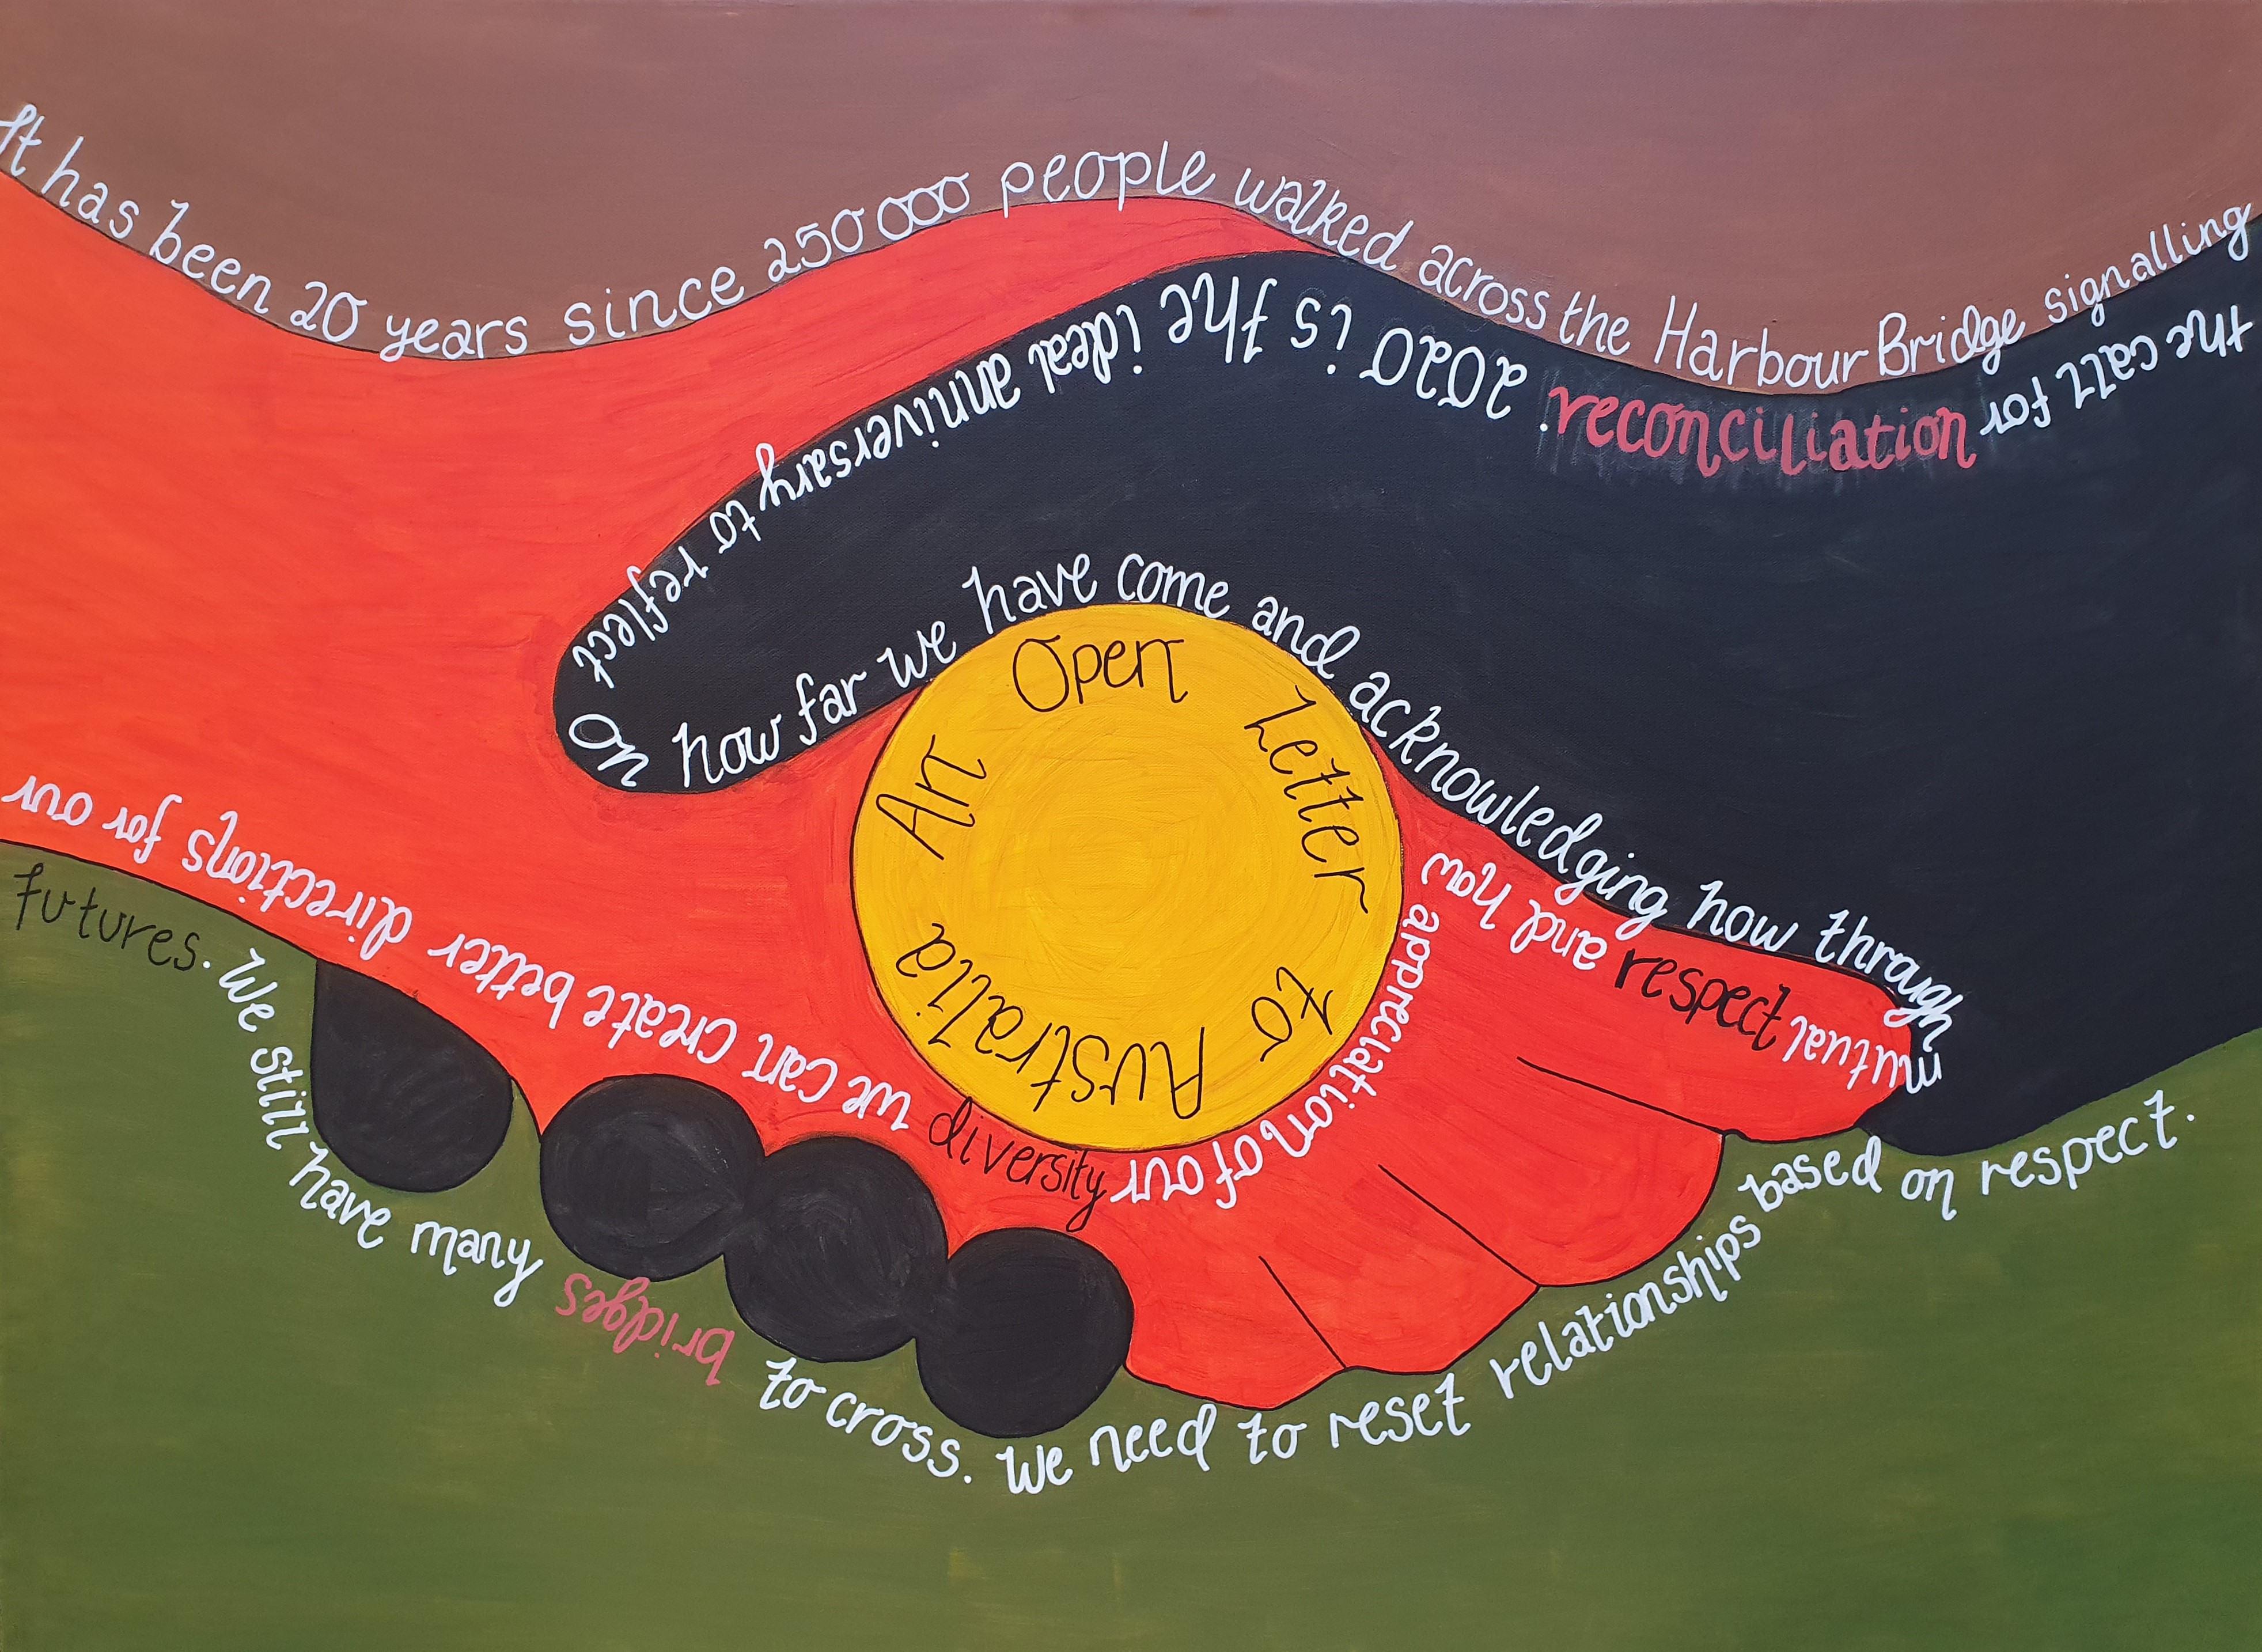 Thumbnail for ‘Youth Speakout’ as Australia celebrates Aboriginal history, culture and achievement